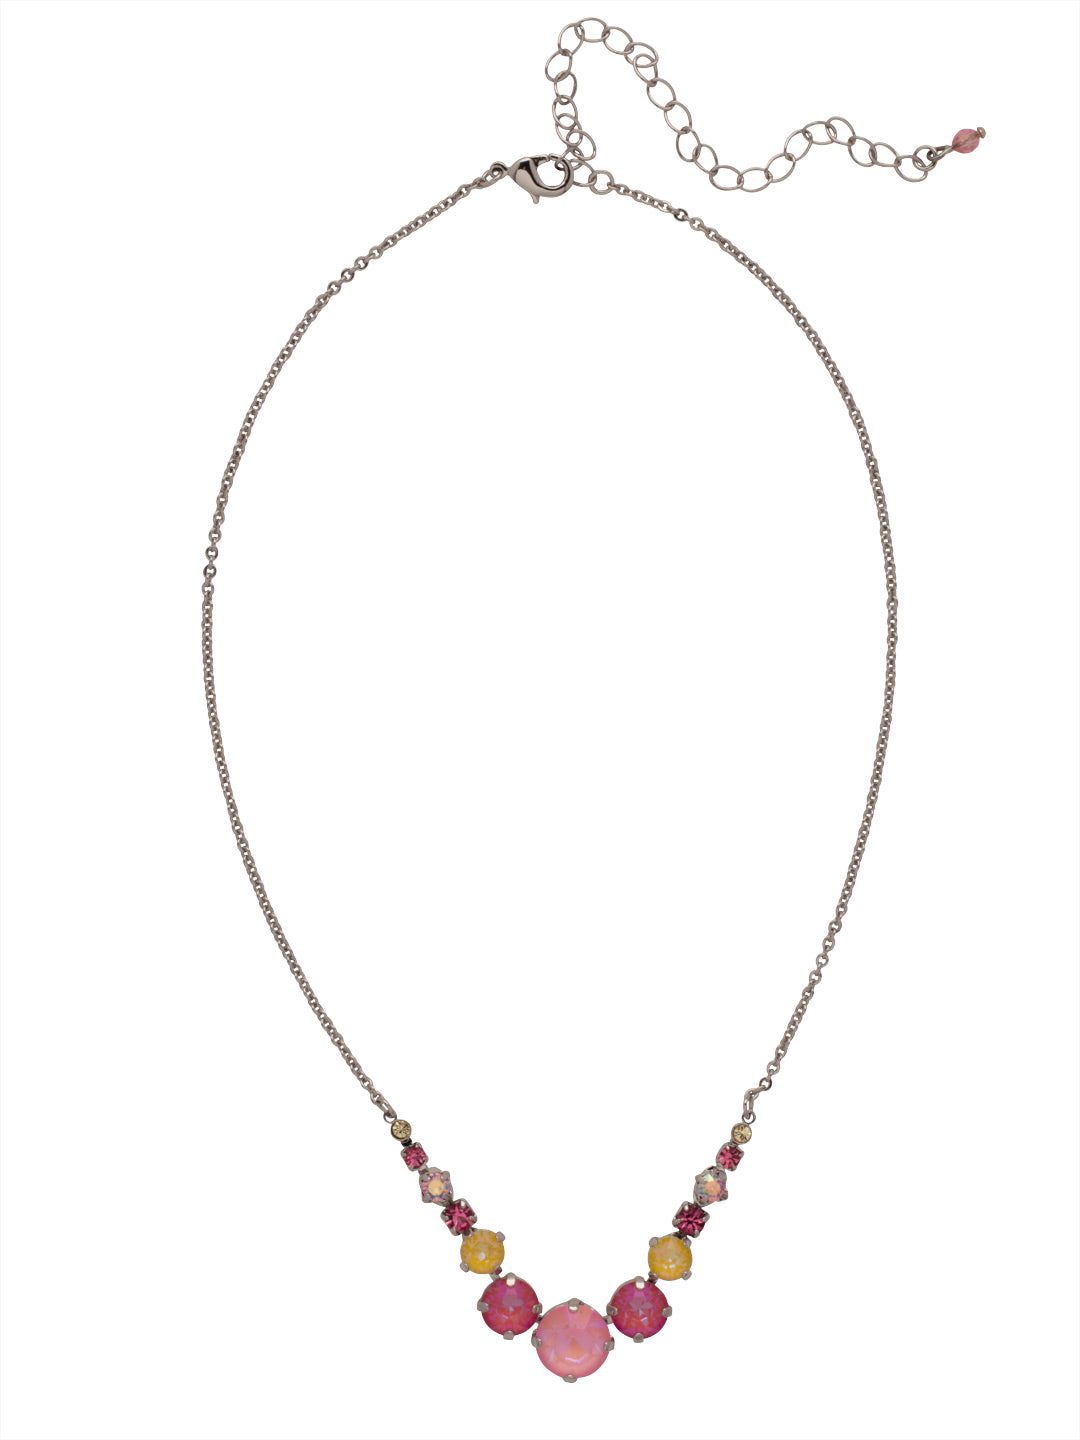 London Tennis Necklace - NCQ14PDPPN - <p>A long, simple chain paired with gorgeous round stones is exactly what every girl needs to dress things up. This round stone necklace is perfect for layering, or to just wear alone. Let the simple sparkle take over. From Sorrelli's Pink Pineapple collection in our Palladium finish.</p>